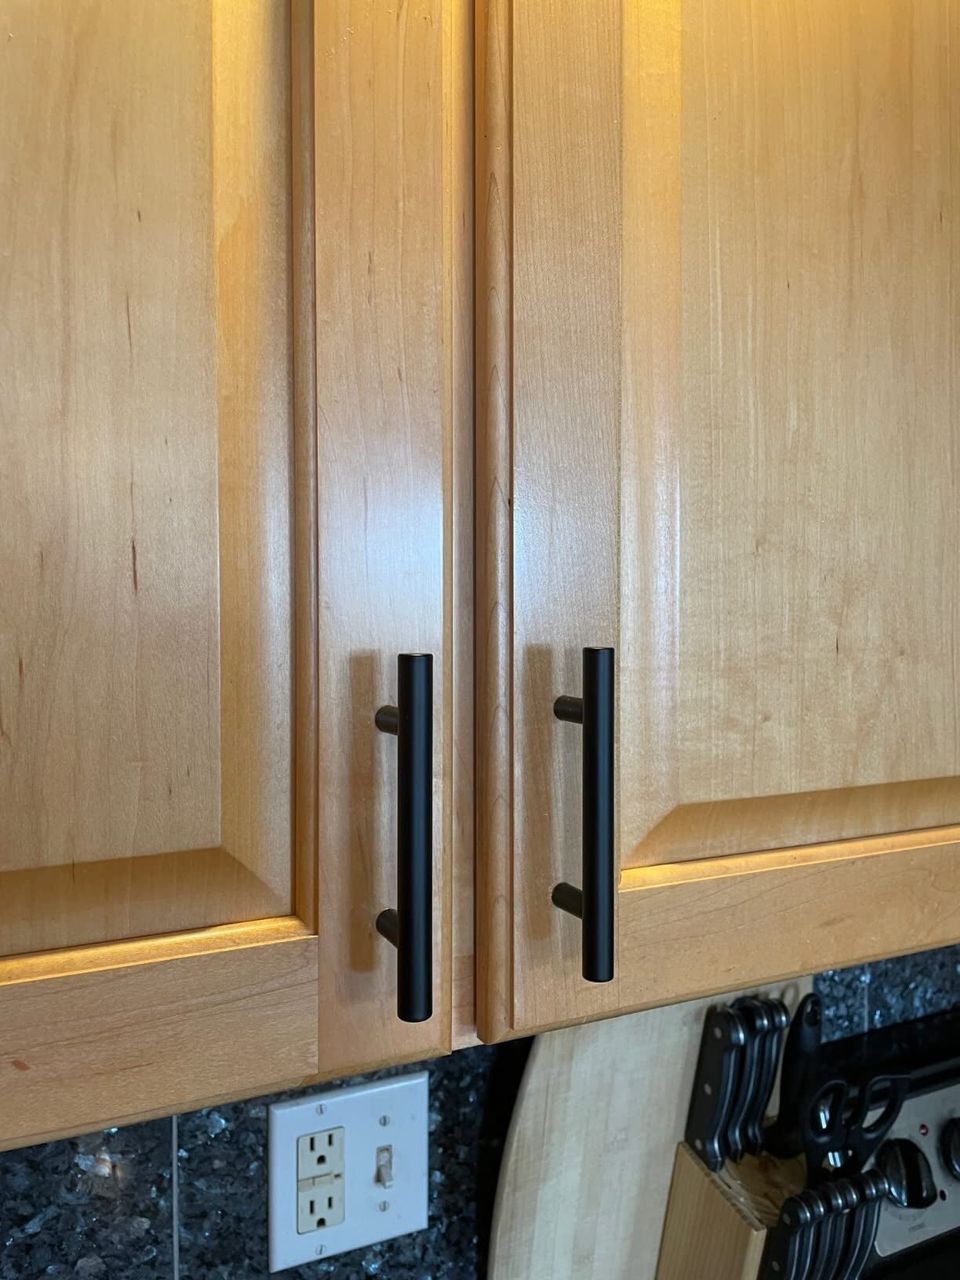 Some matte steel cabinet pulls to add a modern touch to older cabinets